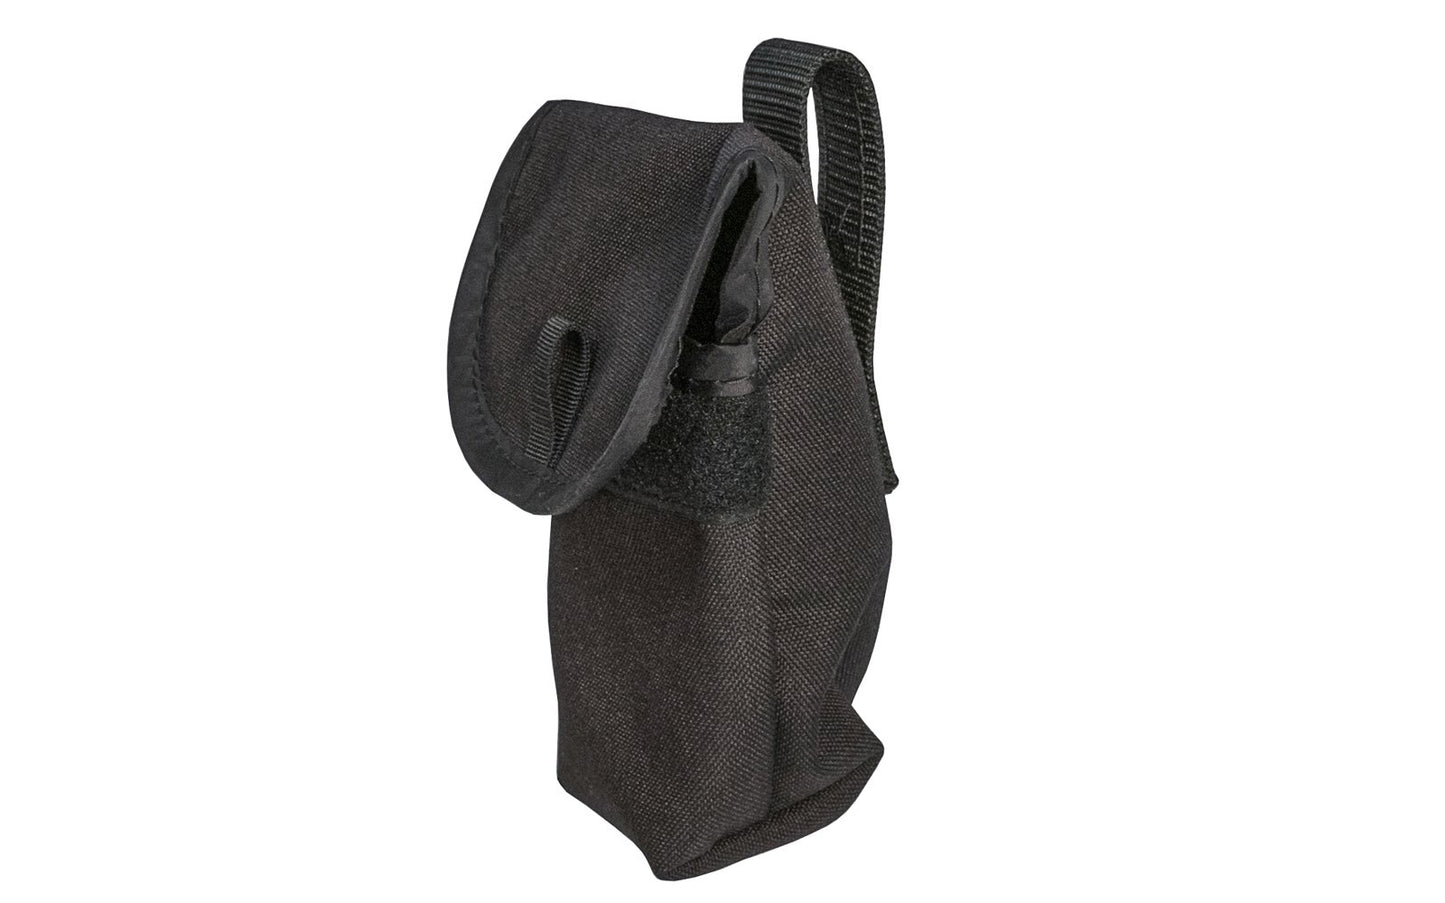 Klein Closable Cordura Pouch ~ Made in USA ~ Model 5714 - Made of Cordura material for exceptional resistance to abrasion, punctures, & tearing - 092644551796 - Klein Cordura Pouch - Klein Cordura Bag - Slide on belts up to 2-1/4" - Cordura material - Helps protect supplies & tools - for wire nuts, connectors & small parts & tools